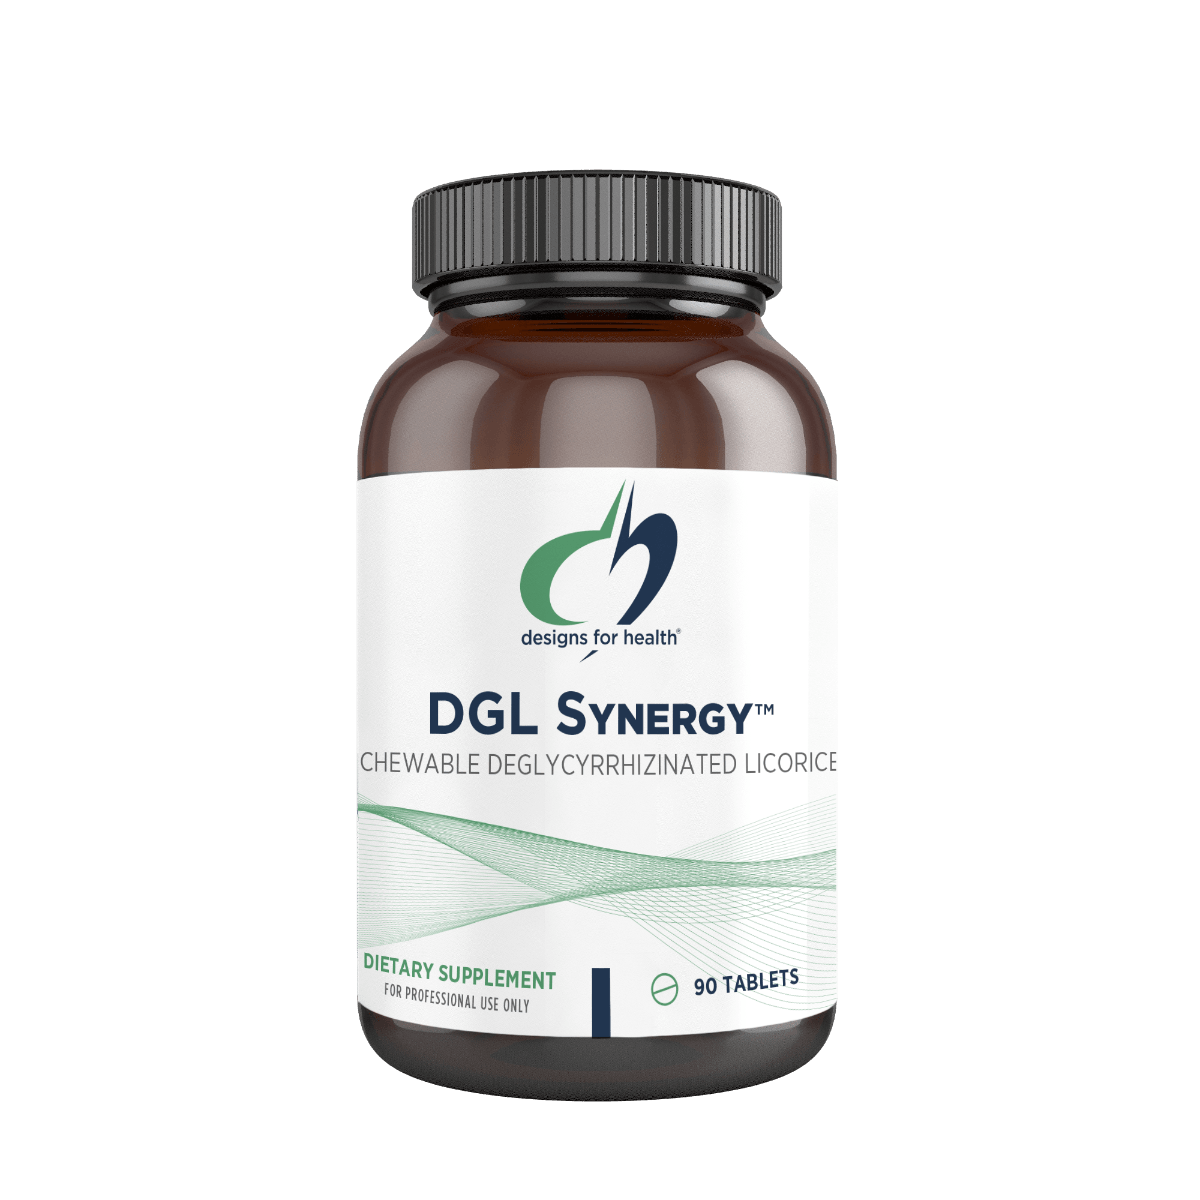 DGL Synergy Design for Health (DFH) in New Zealand